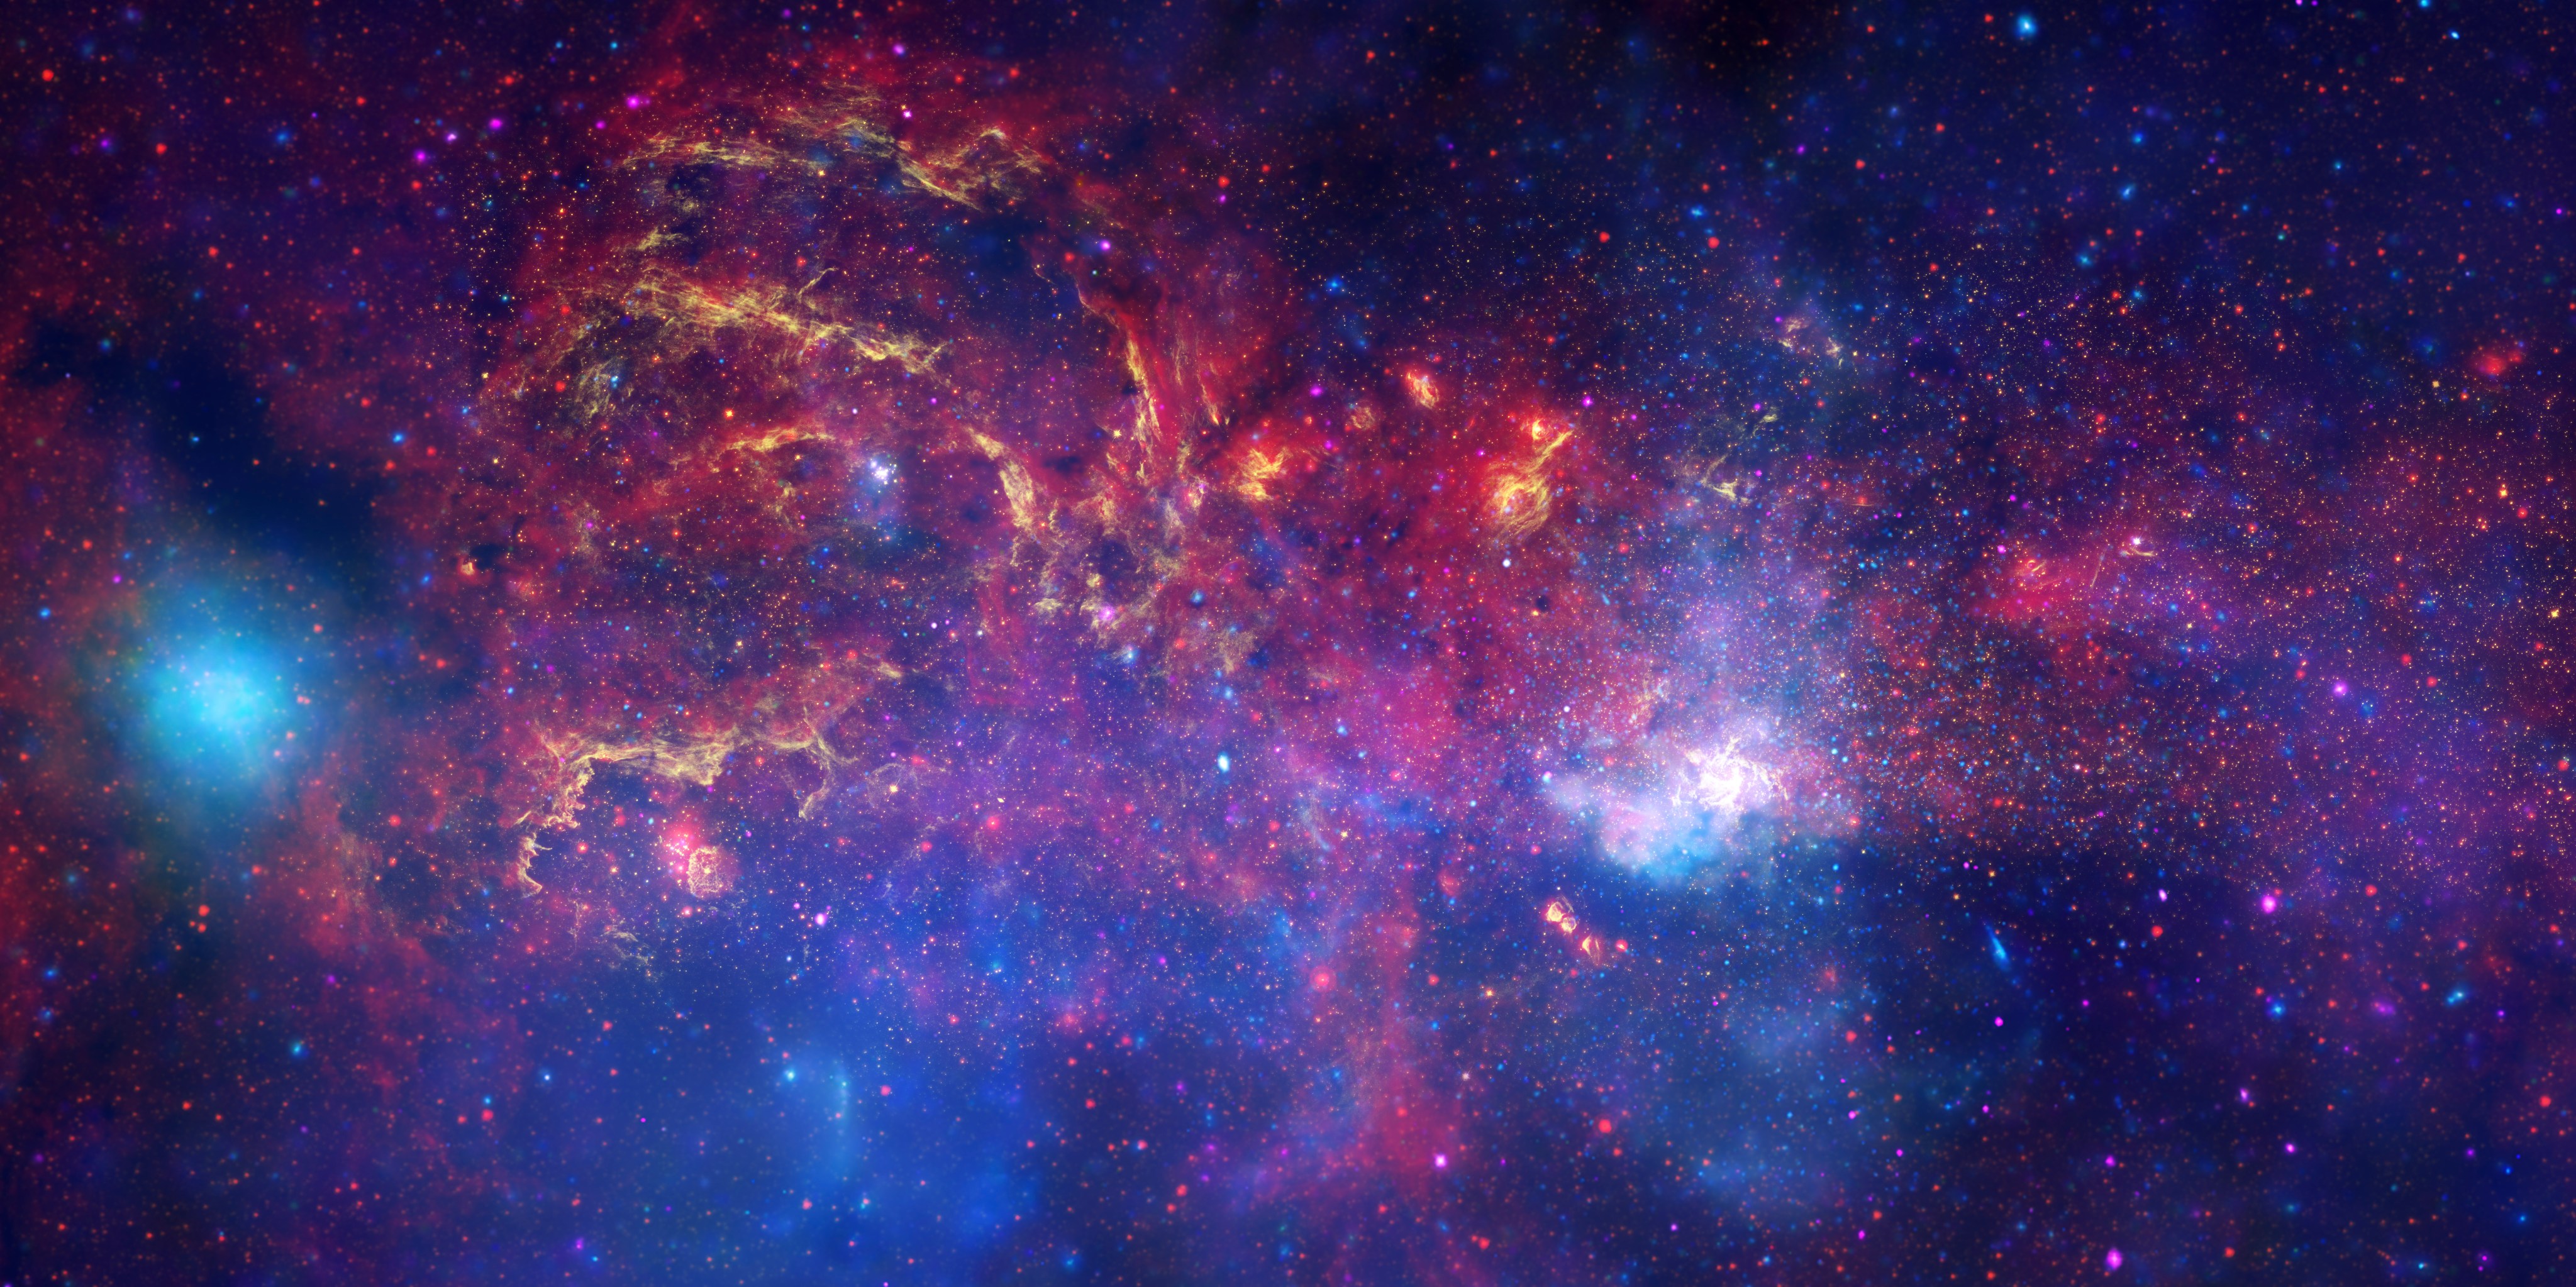 A colorful view of the Milky Way's center region. Colors of red, orange, yellow, blue, pink, and white are stars, clouds, and filaments against a dark backdrop.